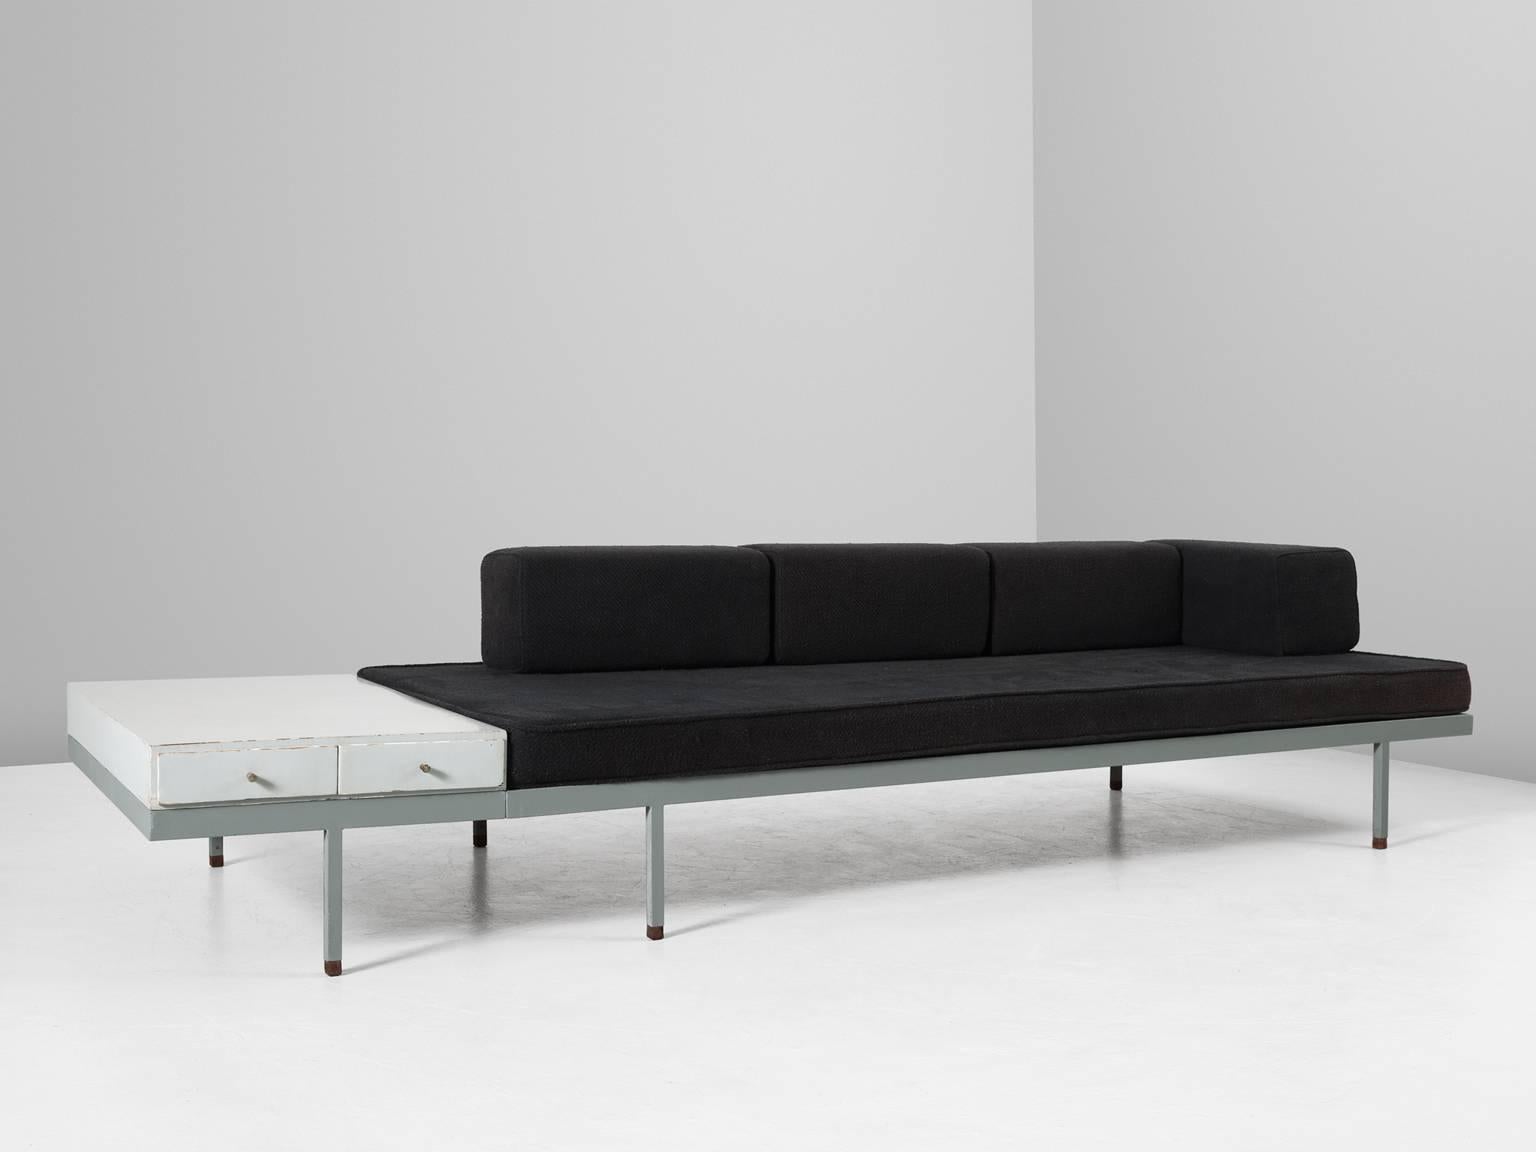 Bench, in metal, wood and fabric, Europe 1960s. 

Modern sofa with black fabric upholstery and metal frame. With side table and integrated drawers.Sleek and modern design due the straight lines and metal frame. The integrated side table is a nice